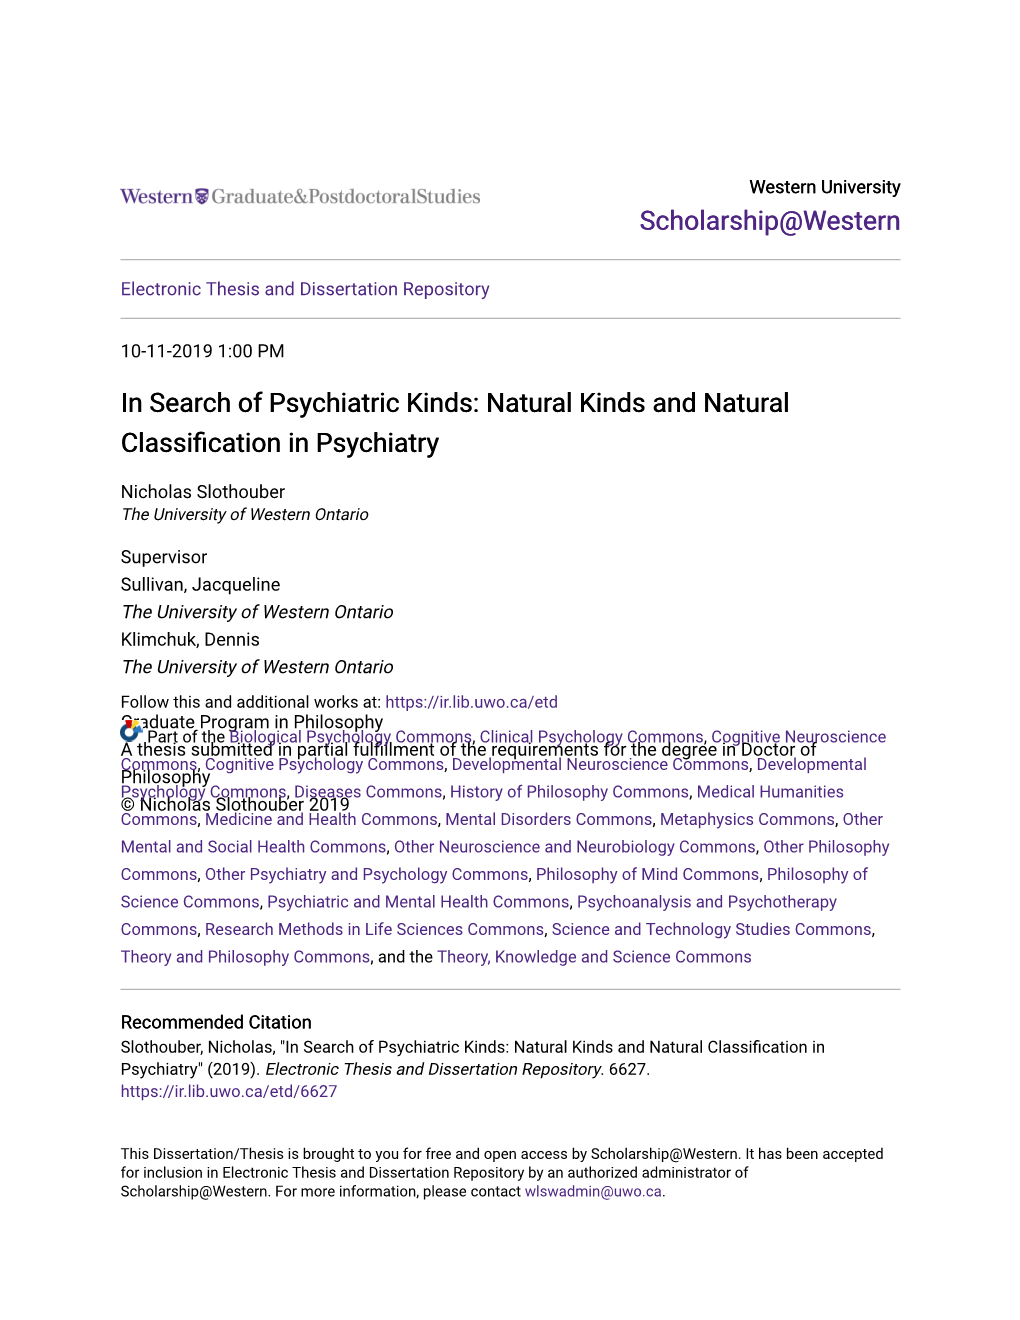 Natural Kinds and Natural Classification in Psychiatry